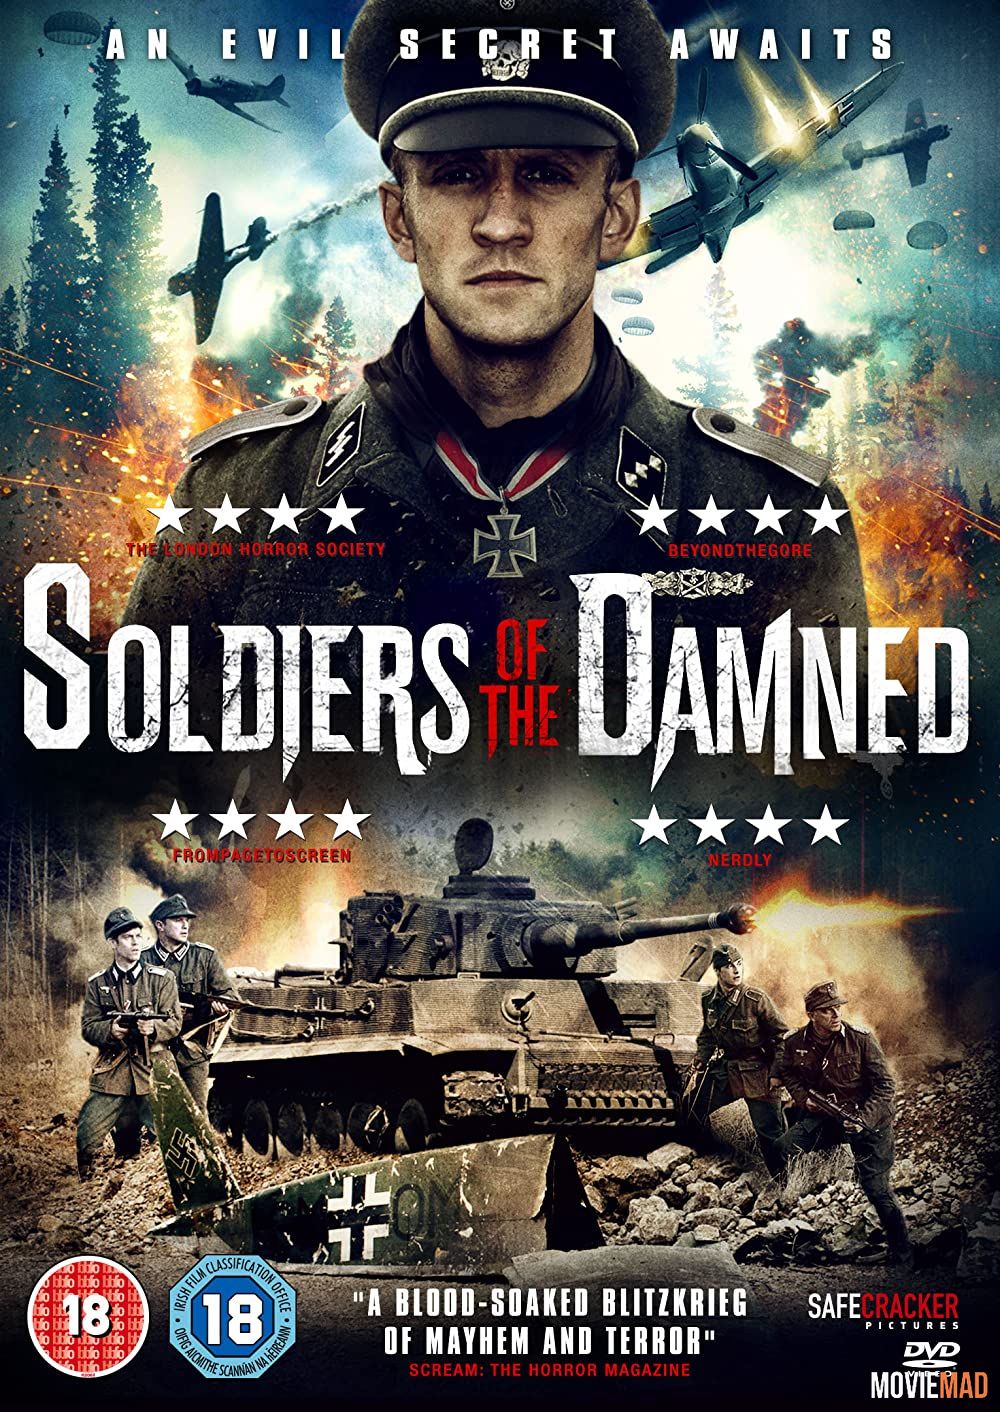 Soldiers of the Damned (2015) Hindi Dubbed BluRay Full Movie 720p 480p